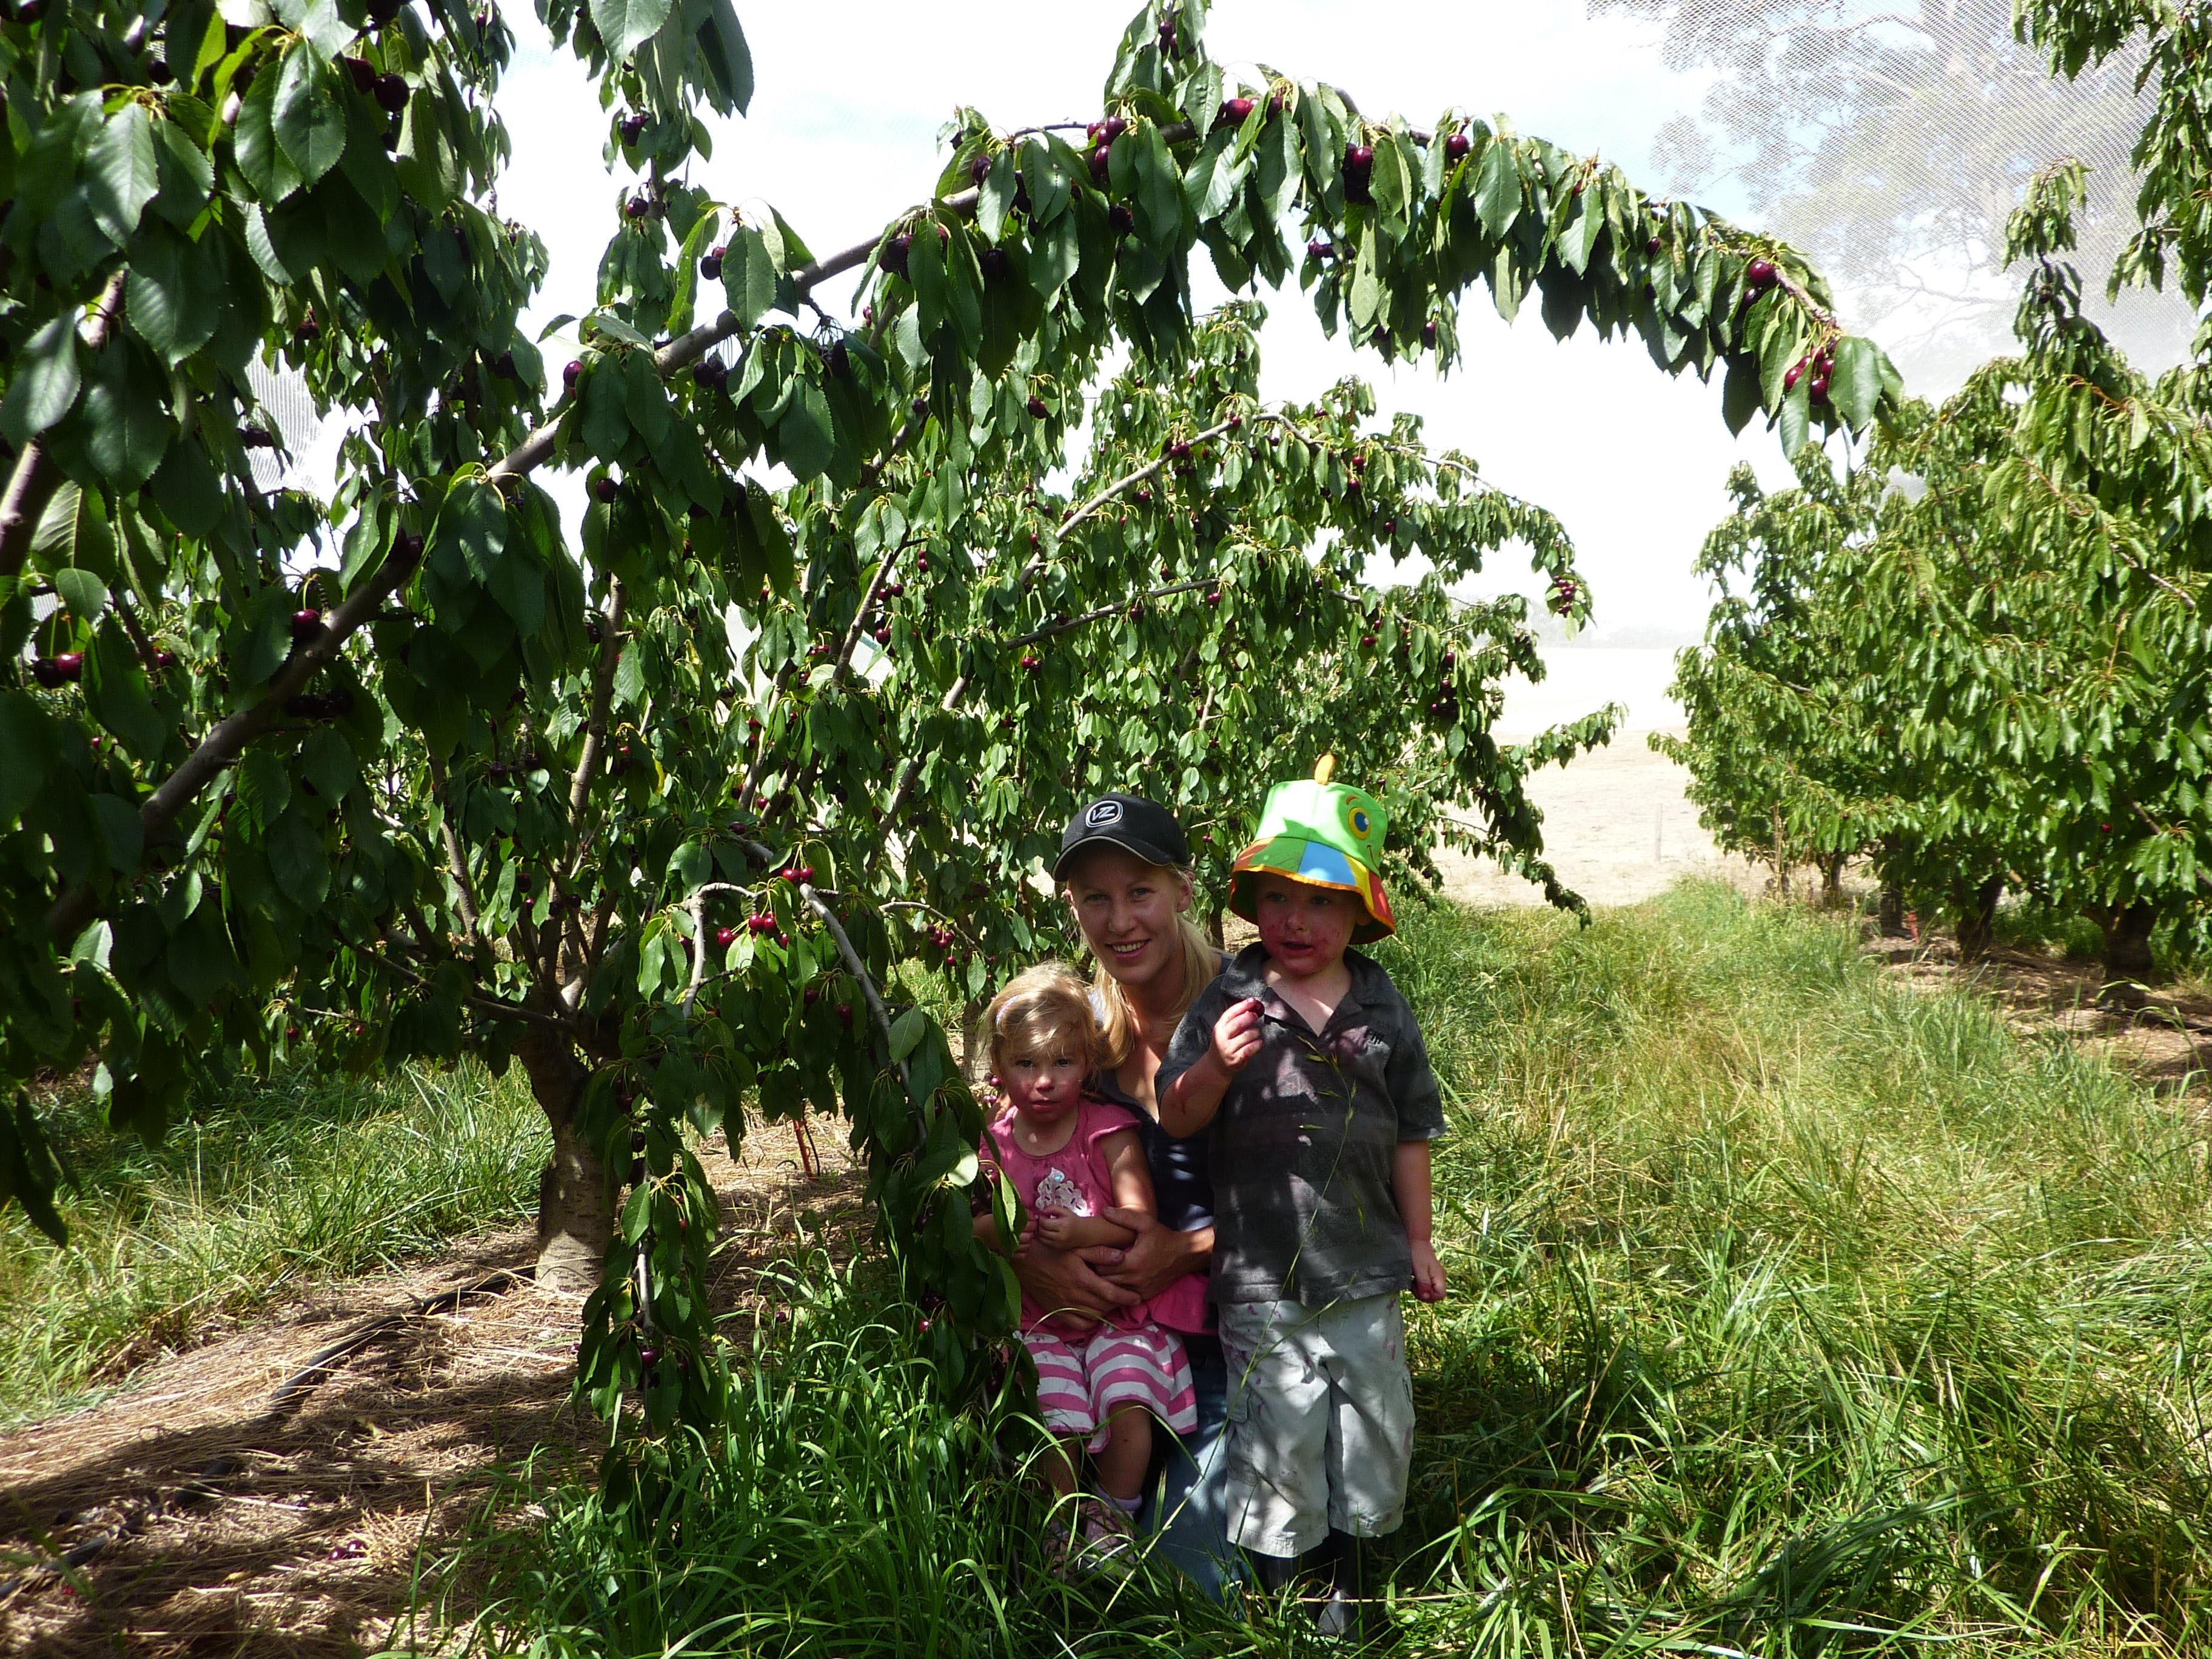 Harben Vale Pick Your Own Cherries - Tourism Adelaide